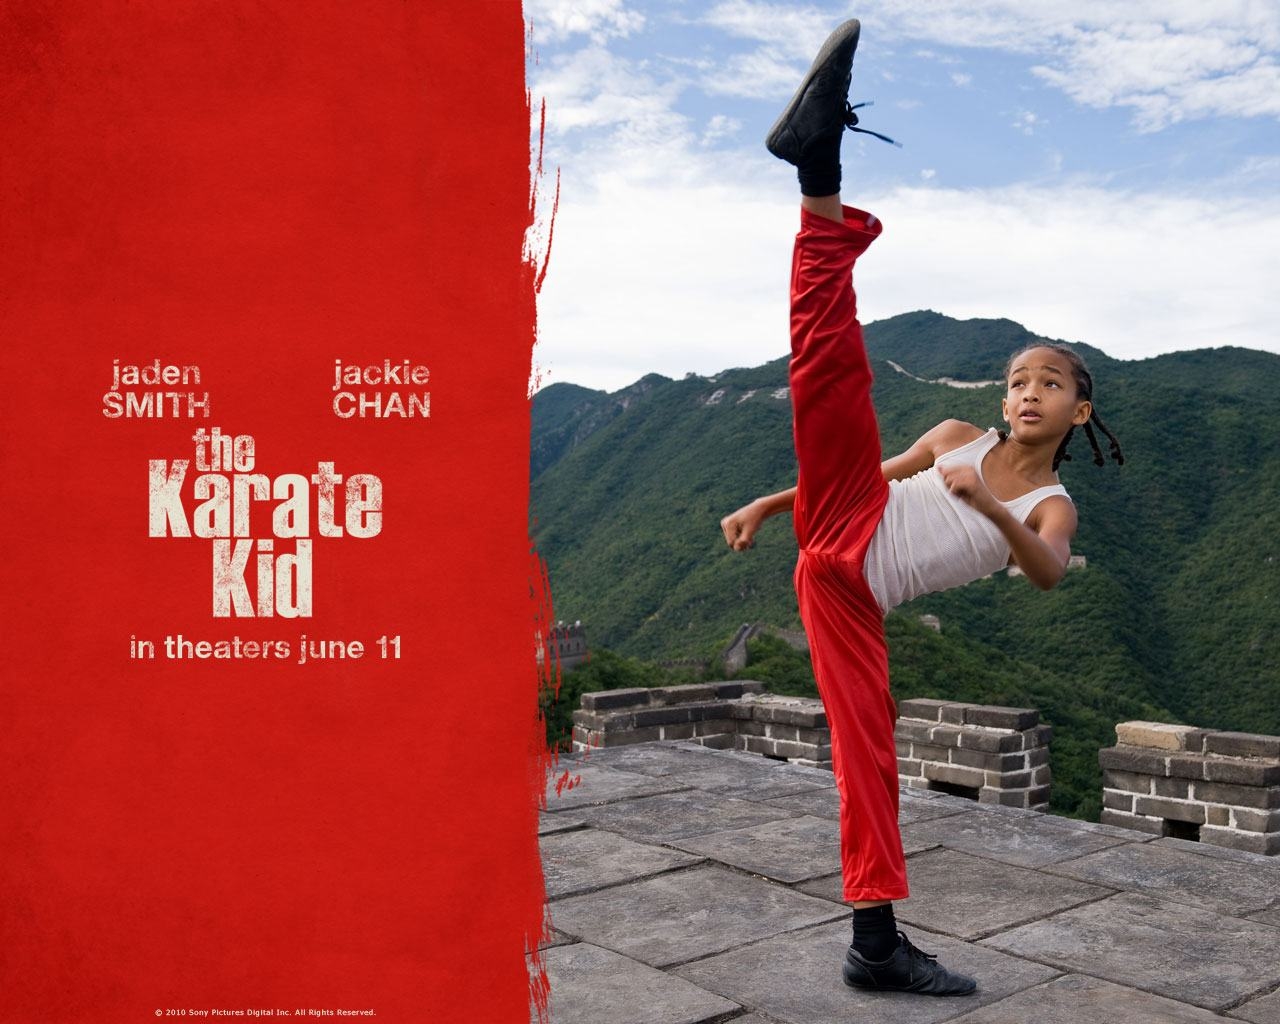 Wallpapers Backgrounds   Karate Kid 2010 Wallpapers